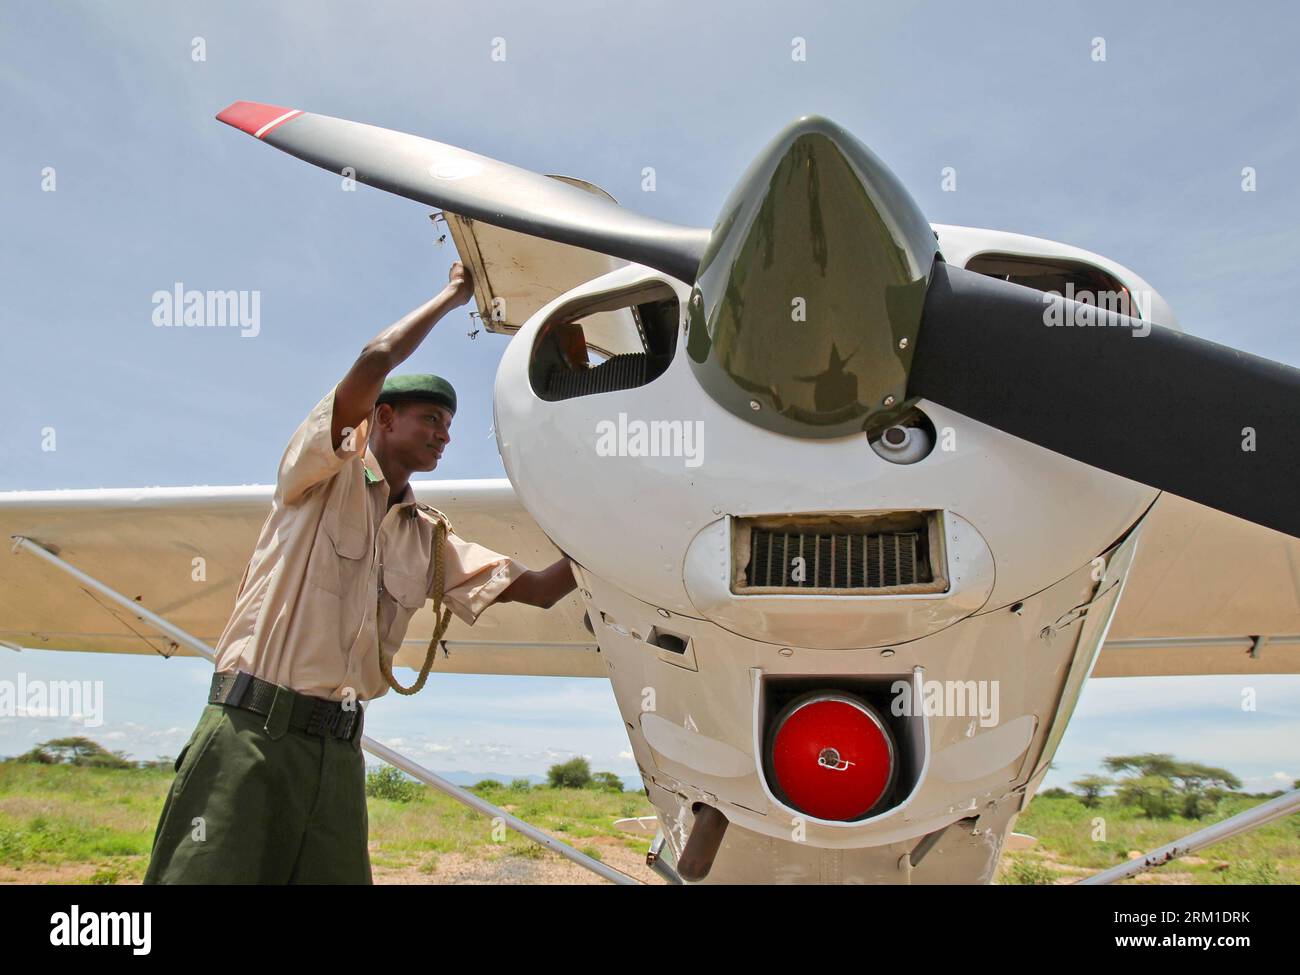 Bildnummer: 59560682  Datum: 21.04.2013  Copyright: imago/Xinhua NAIROBI, April, 2013 - Peter Lempatu checks his airplane before a monitoring operation for Save the Elephant at Buffalo Spring National Reserve, north of Kenya, on April 21, 2013. Save the Elephants (STE) was founded by Iain Douglas-Hamilton, a zoologist known for his study of elephants, in northern Kenya in 1993. It works to sustain elephant population and preserve the habitats in which elephants are found, while at the same time fostering a heightened appreciation and visibility for elephants and their fragile existence. Resear Stock Photo